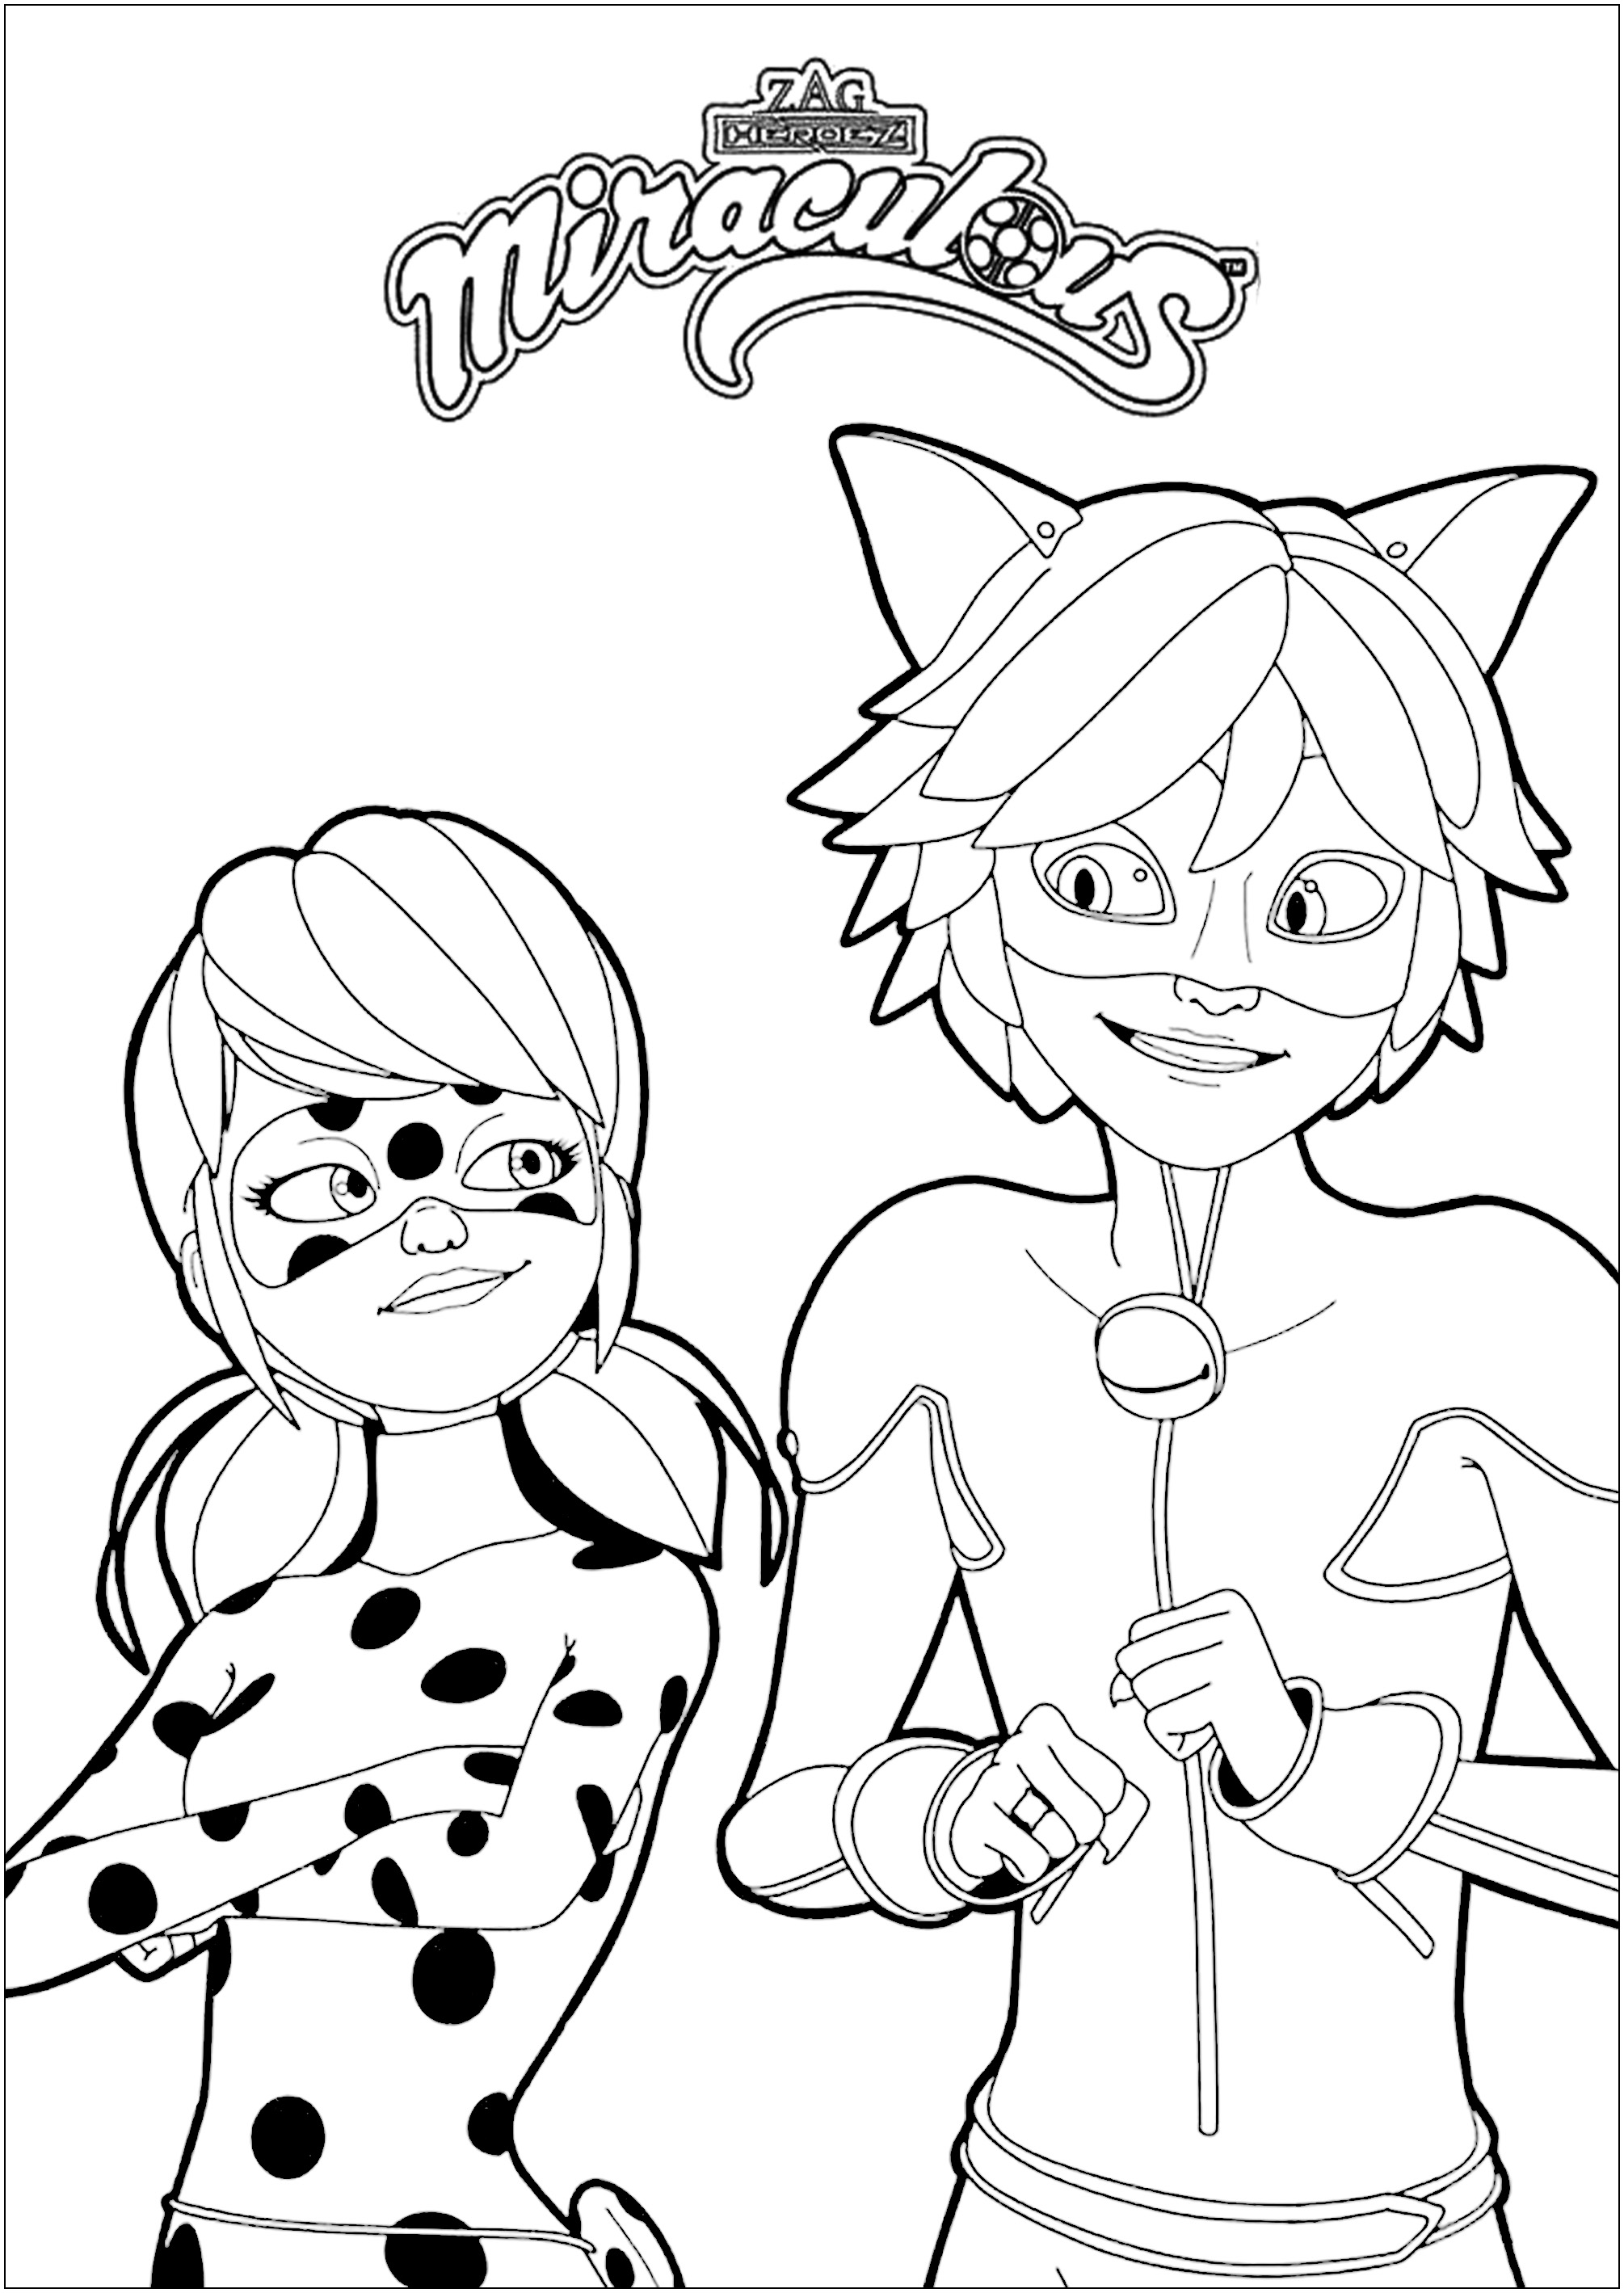 Miraculous lady bug to color for kids - Miraculous / LadyBug Kids